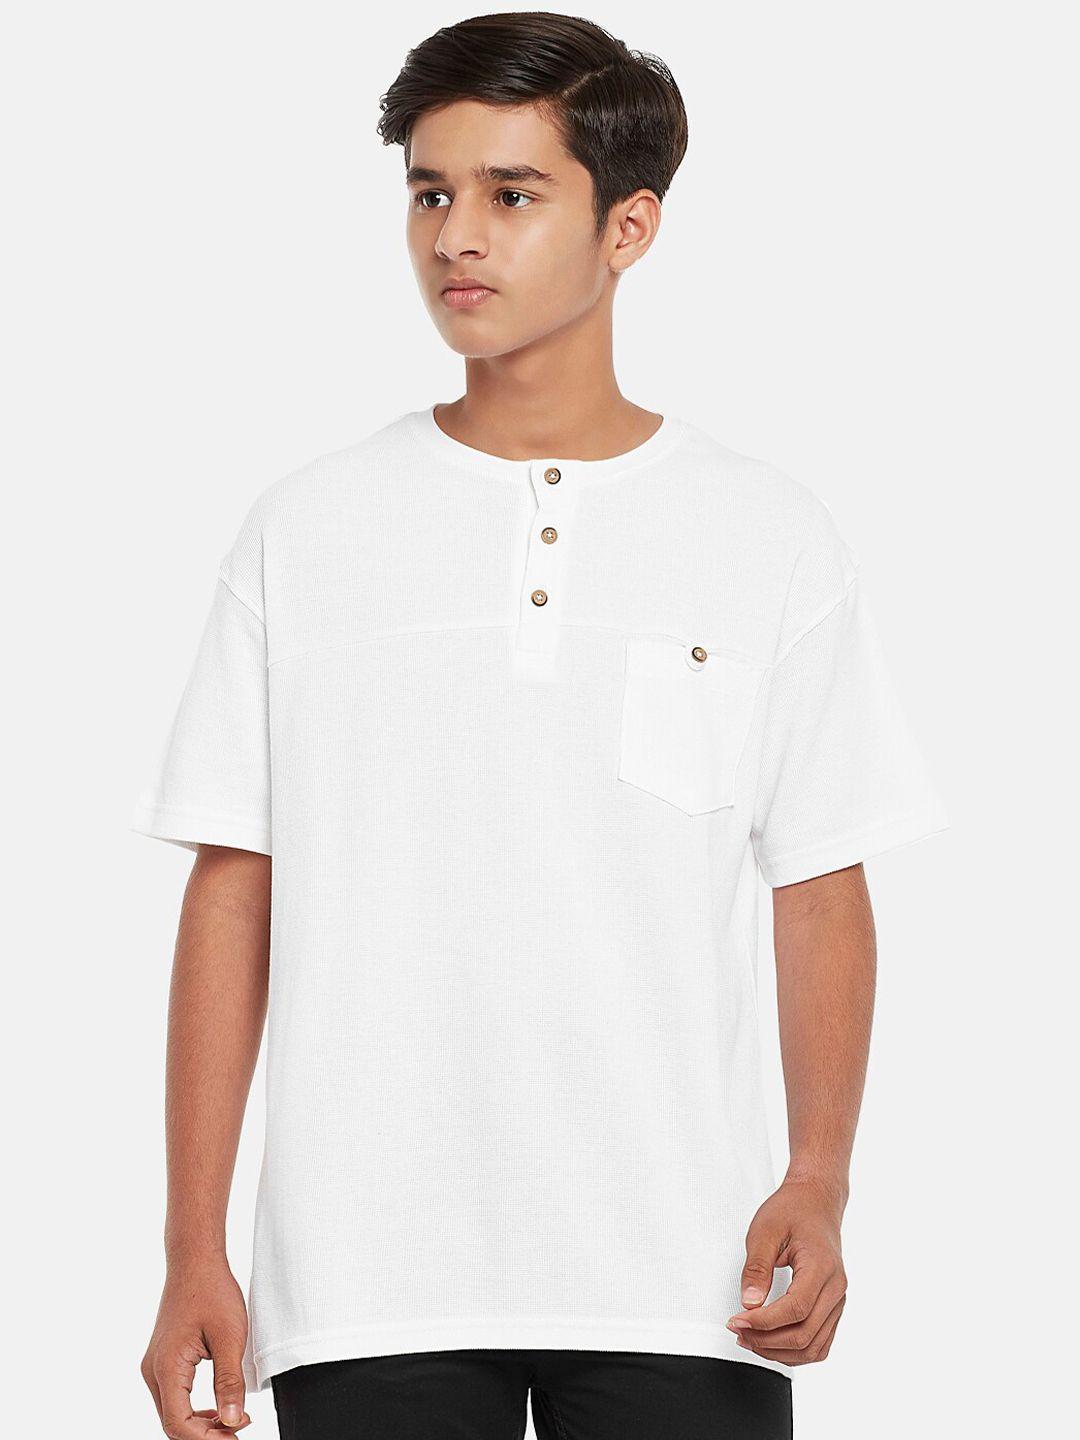 coolsters by pantaloons boys white henley neck t-shirt